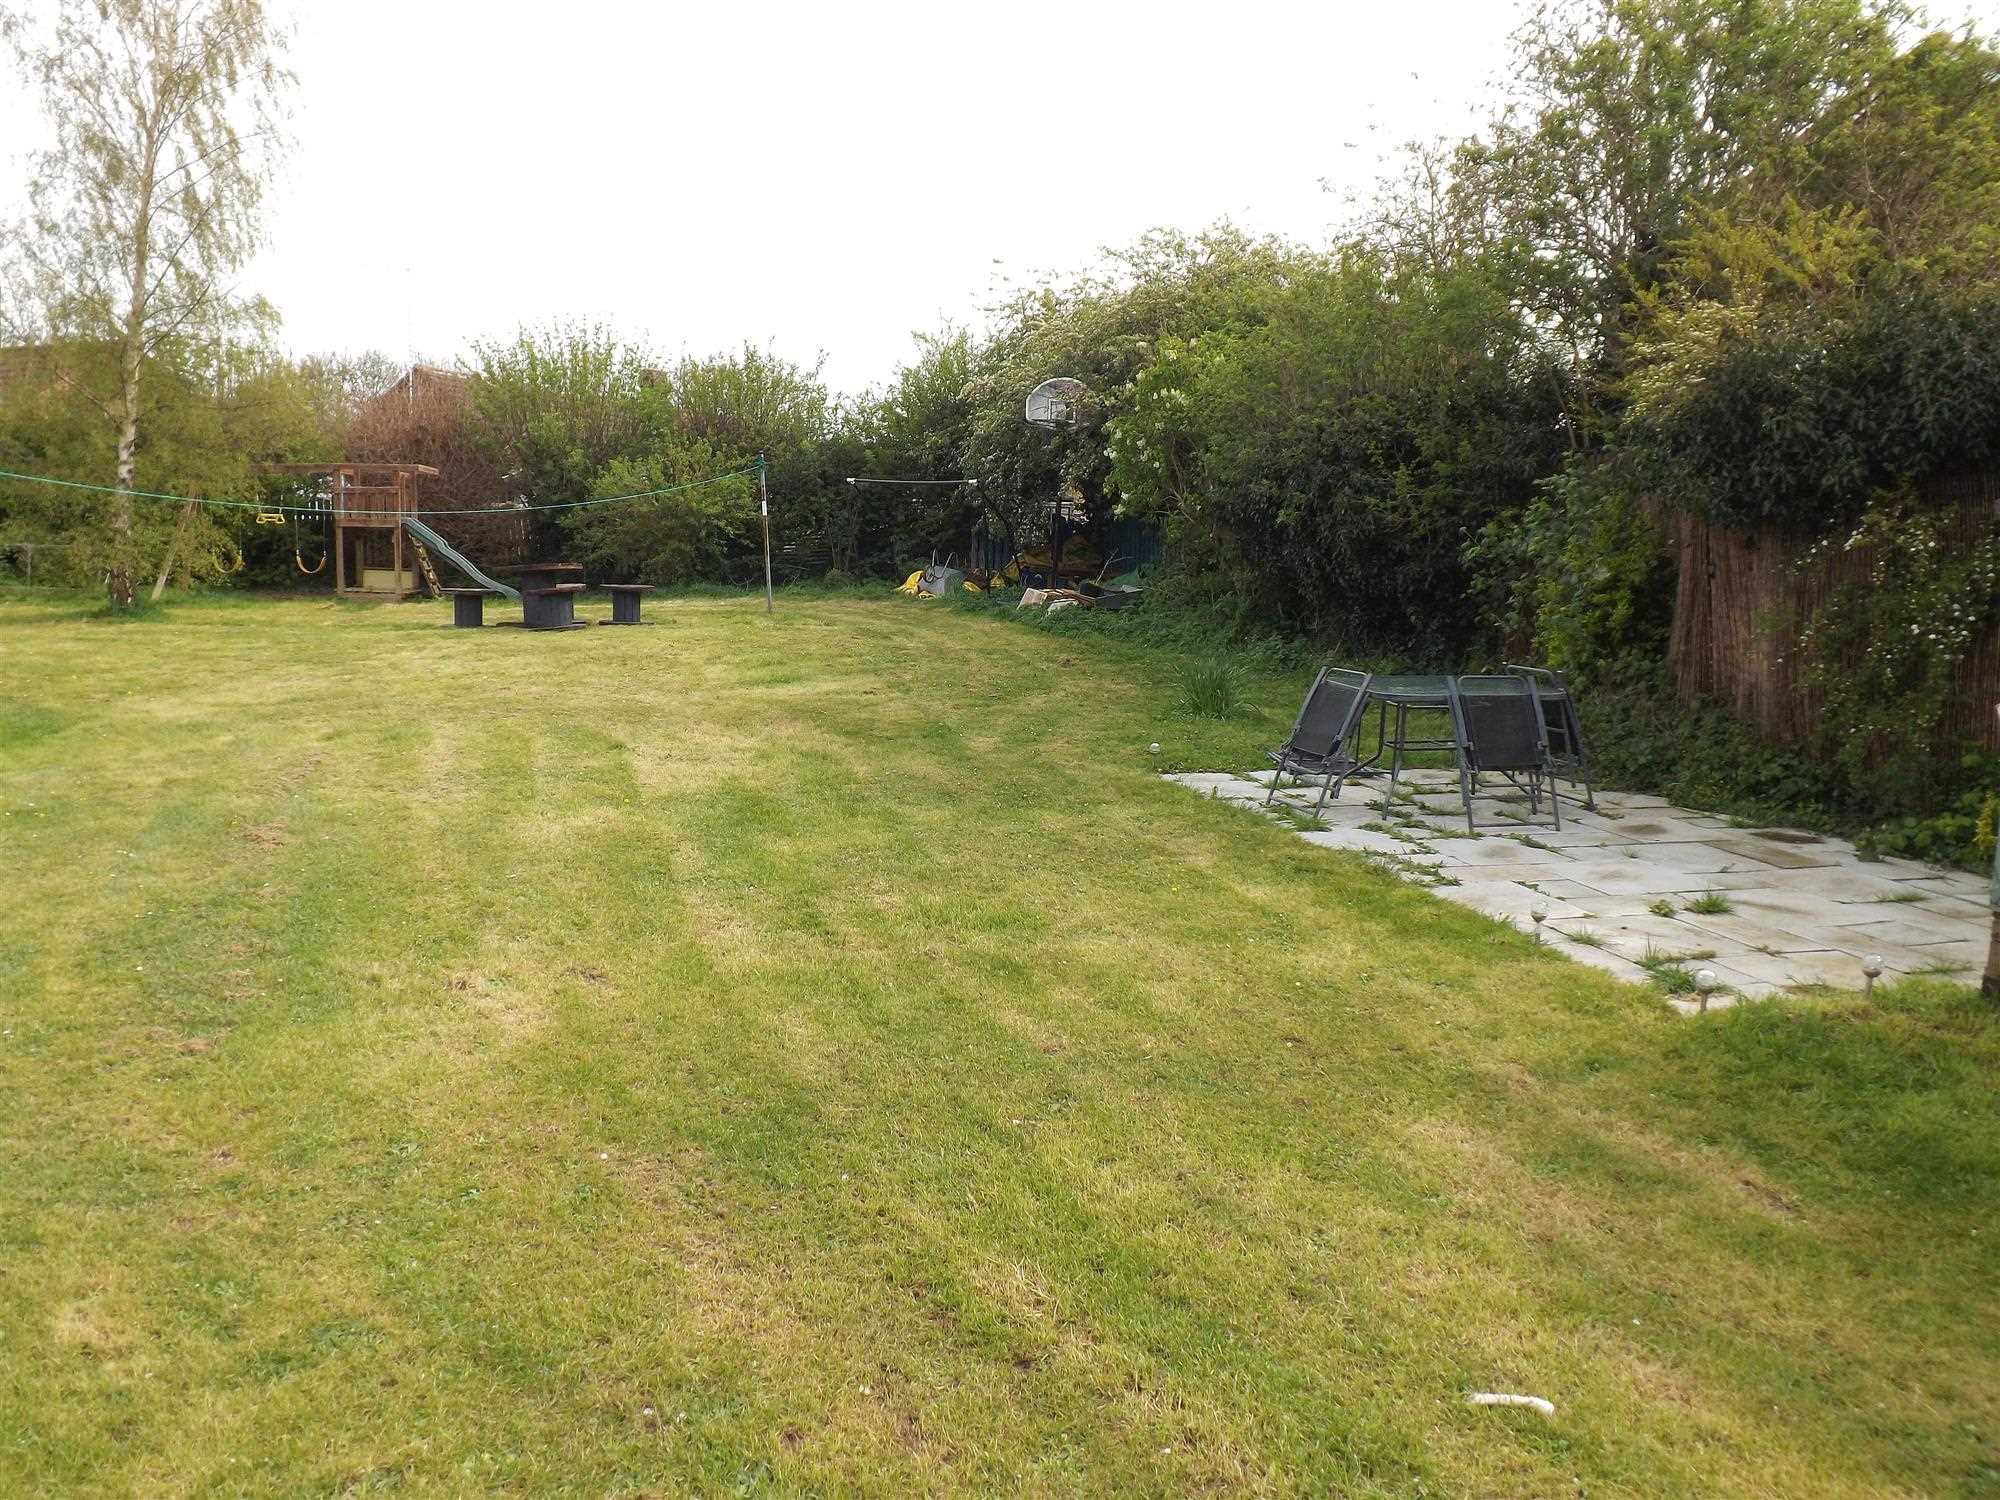 Field View, Hickinwood Lane - Picture 26